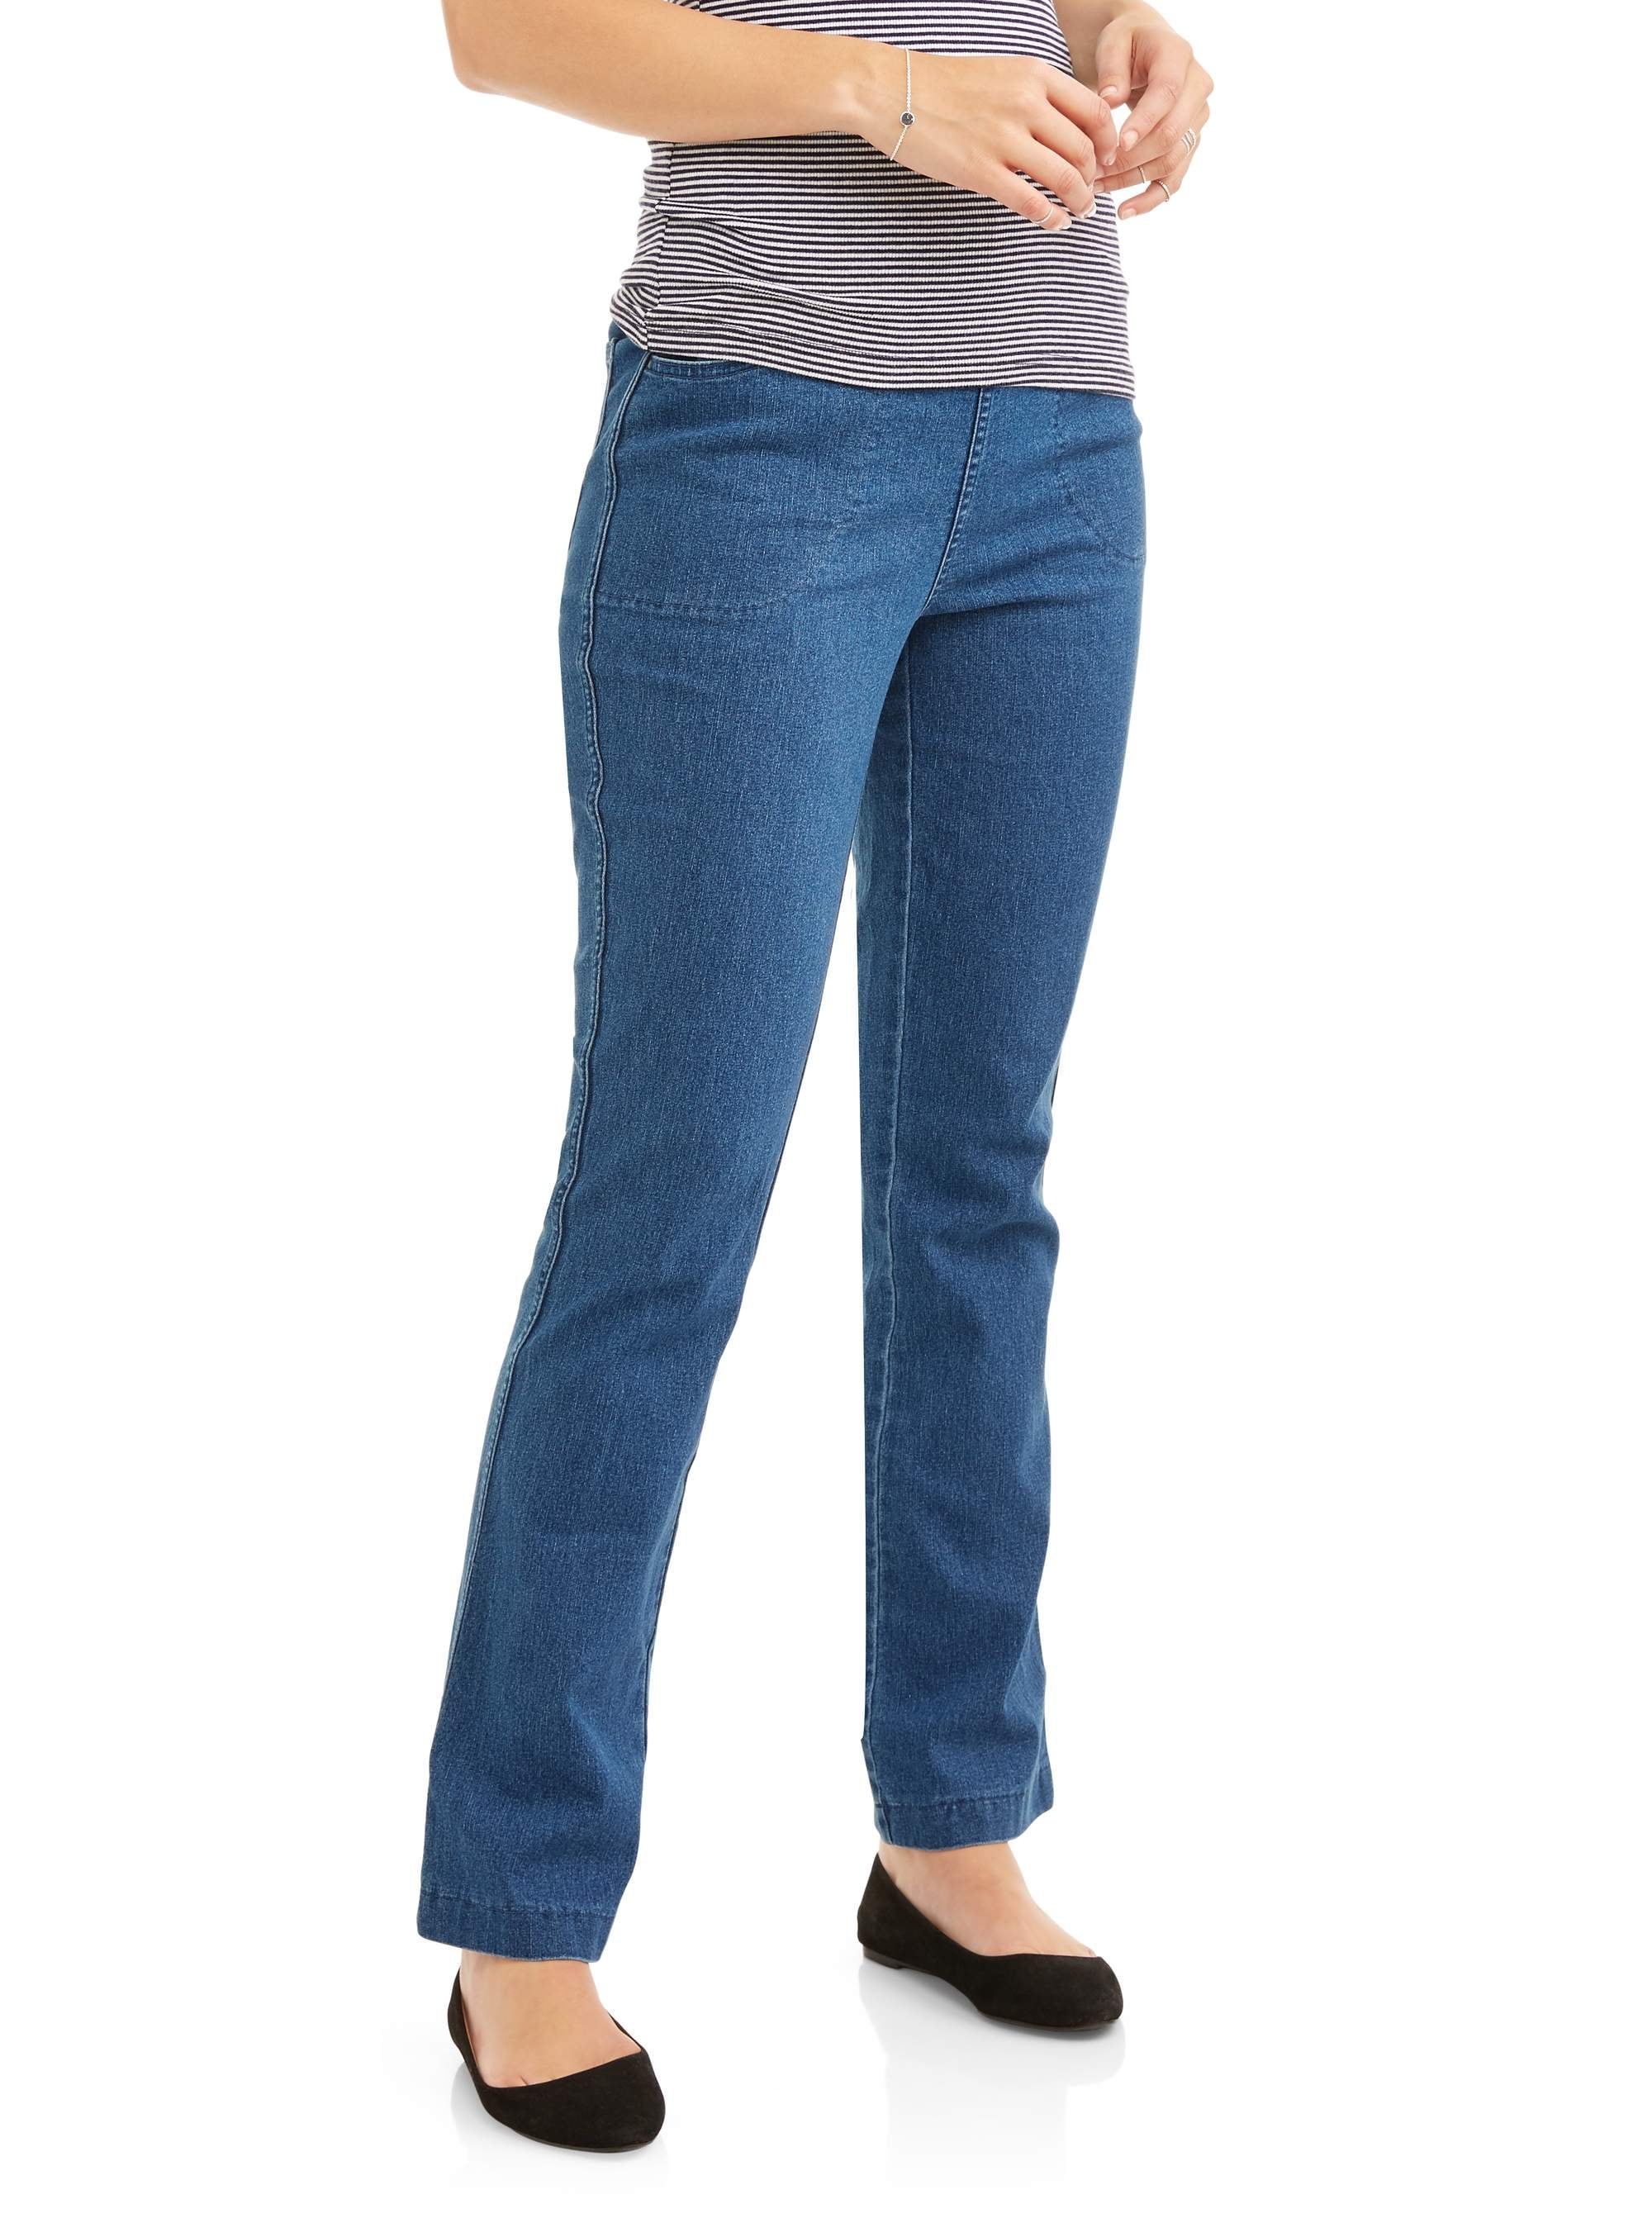 RealSize Women's 4 Pocket Stretch Pull On Bootcut Jeans, Sizes S-XXL, Available in Petite | Walmart (US)